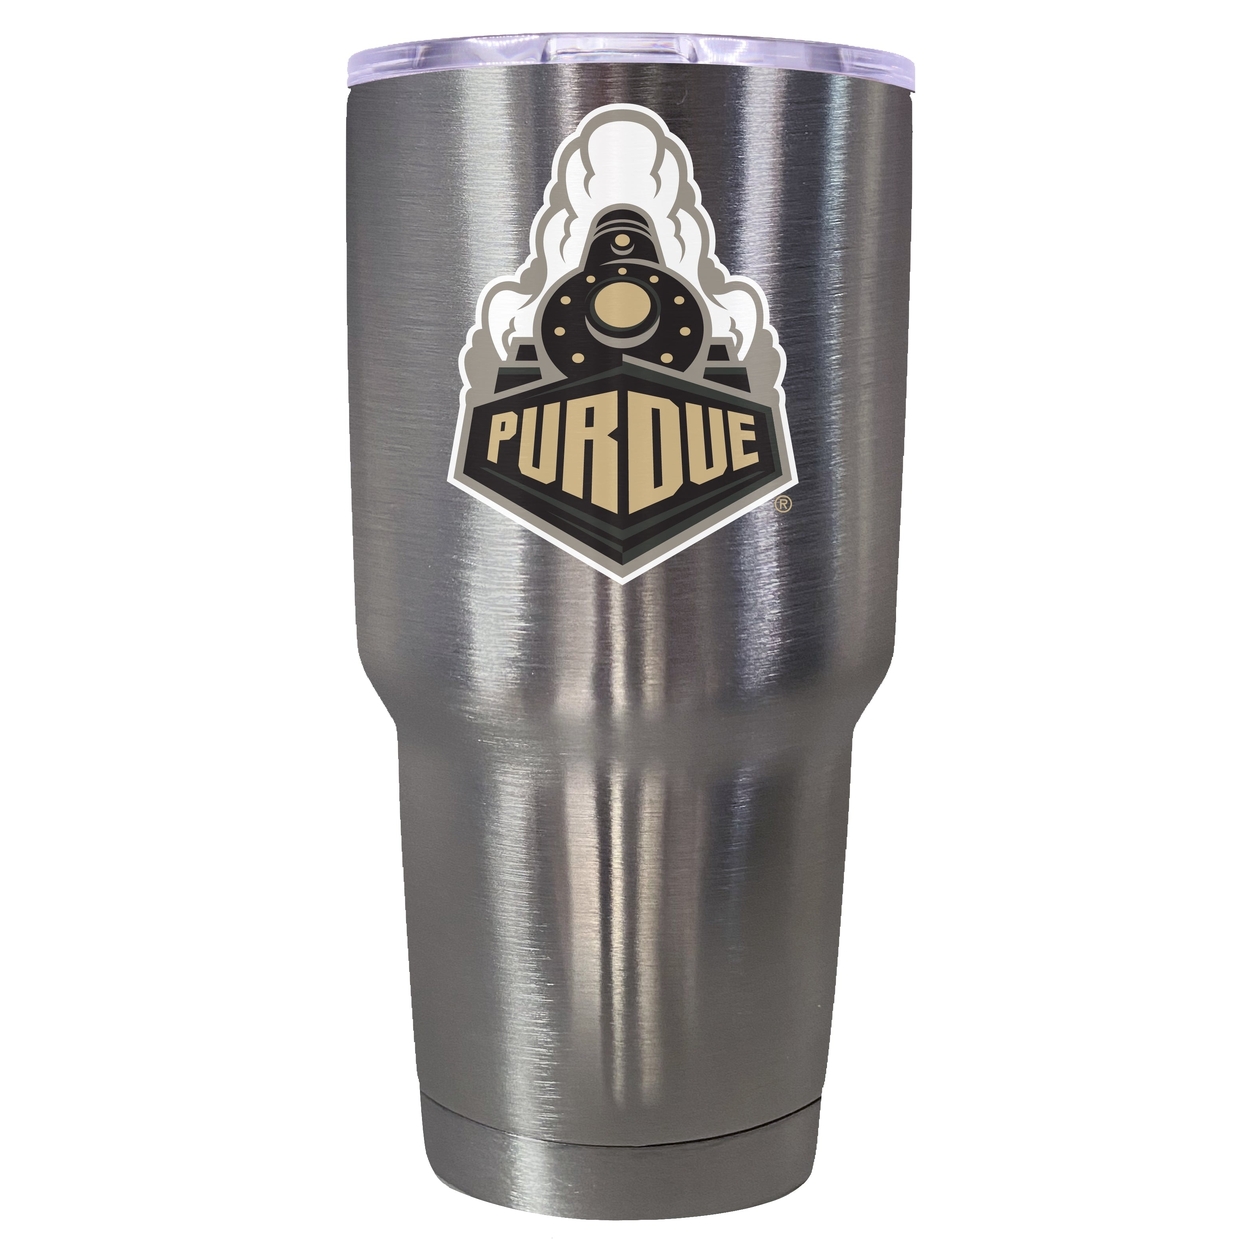 Purdue Boilermakers 24 Oz Insulated Stainless Steel Tumbler